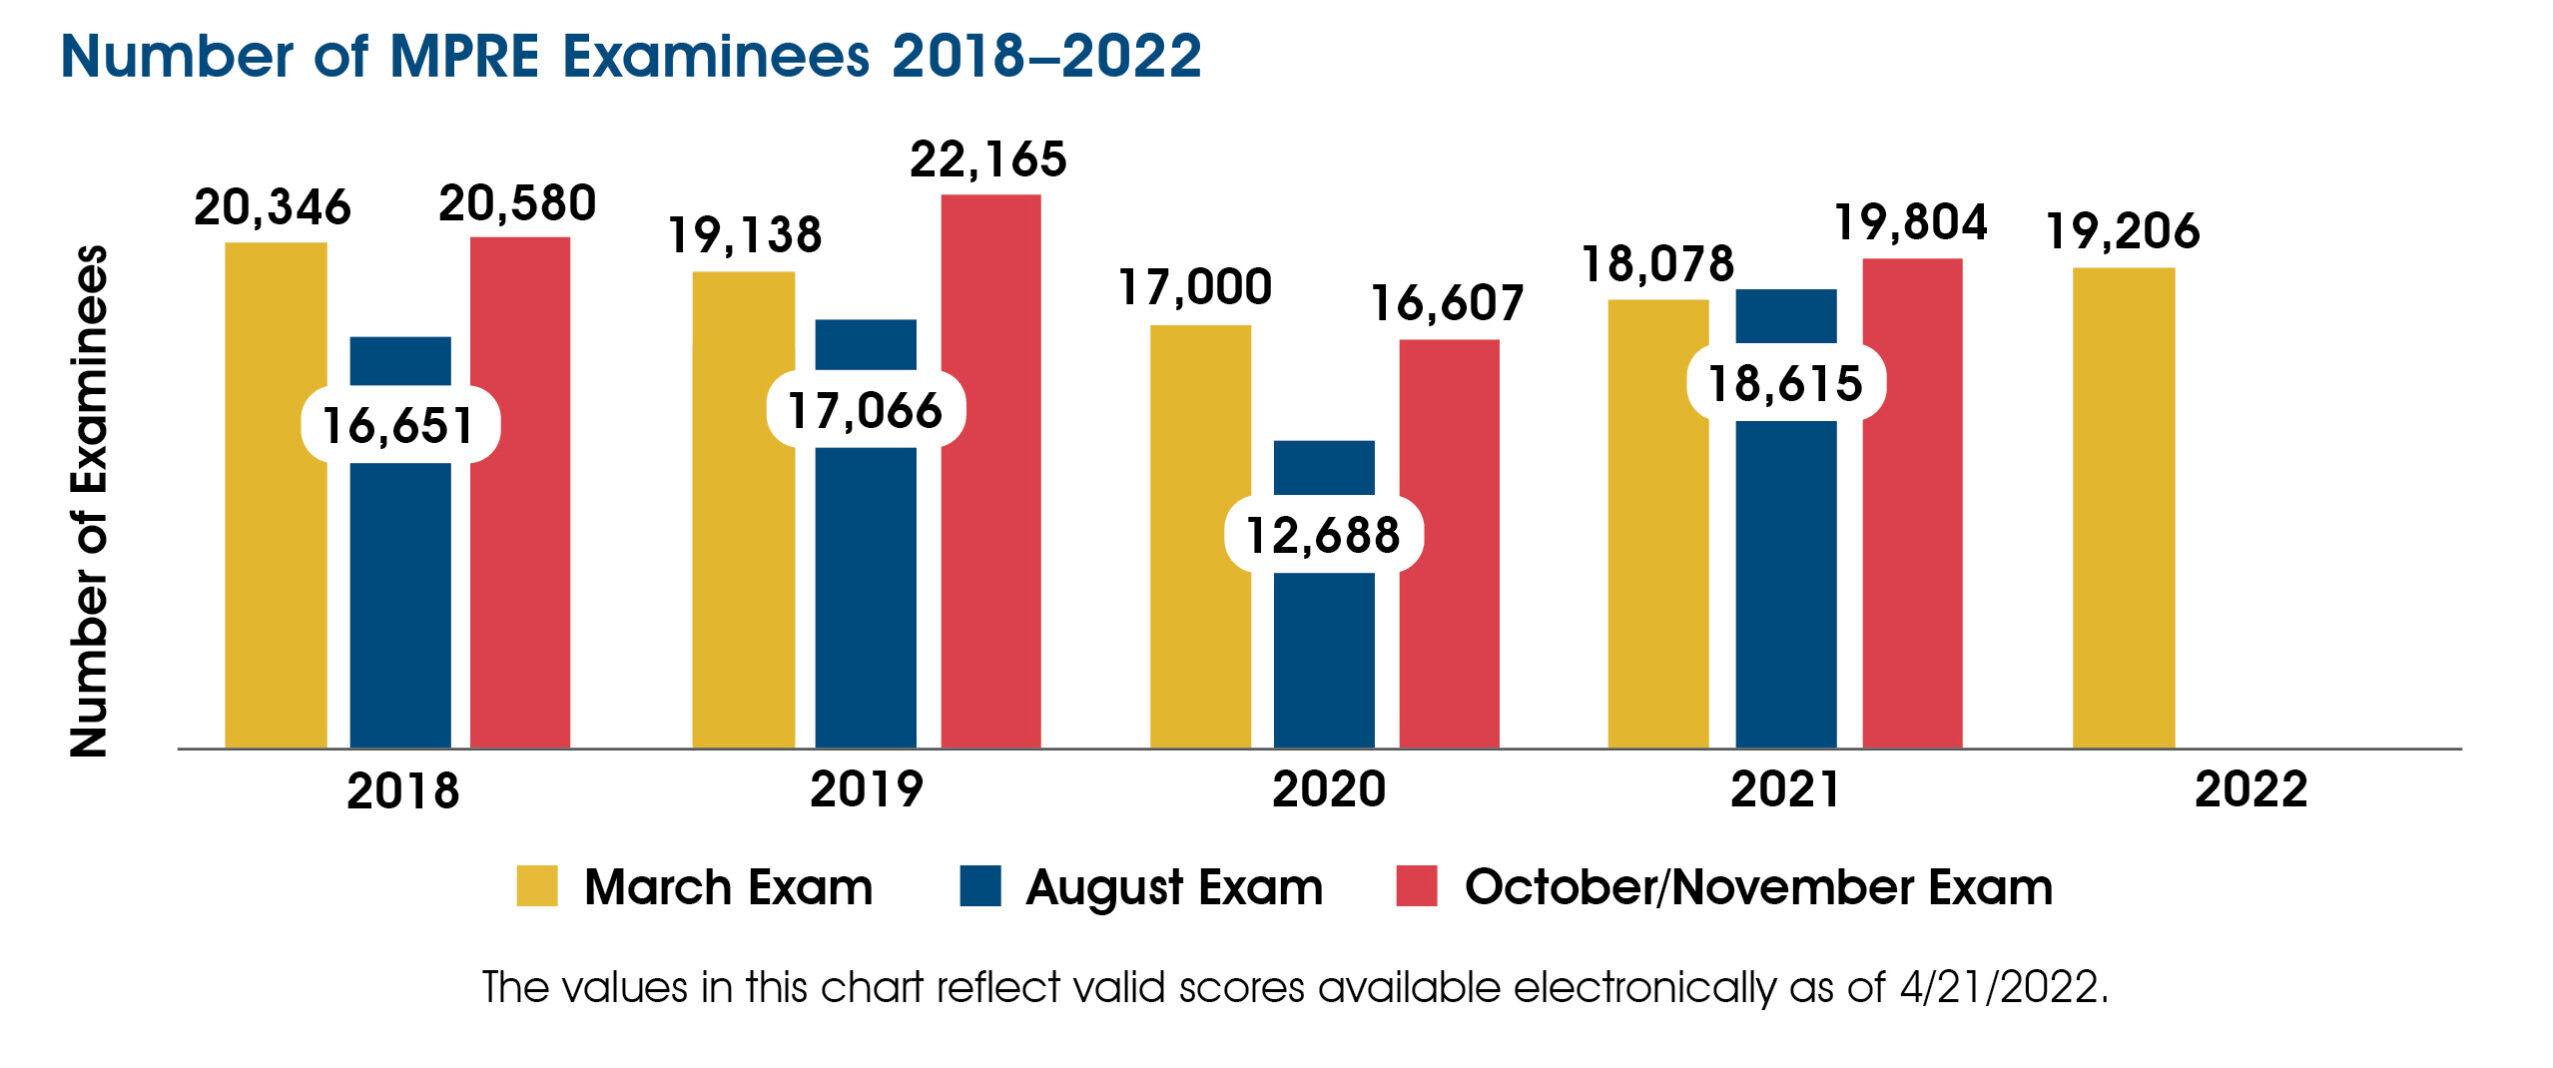 A chart showing the number of MPRE examinees 2018-2022. In March 2018-2022 there were 20,346; 19,138; 17,000; 18,078; and 19,206 examinees. In August 2018-2021 there were 16,651; 17,066; 12,688; and 18,615 examinees. In October/November 2018-2021 there were 20,580; 22,165; 16,607; and 19,804 examinees. The chart includes the following note: The values in this chart reflect valid scores available electronically as of 4/21/2022.